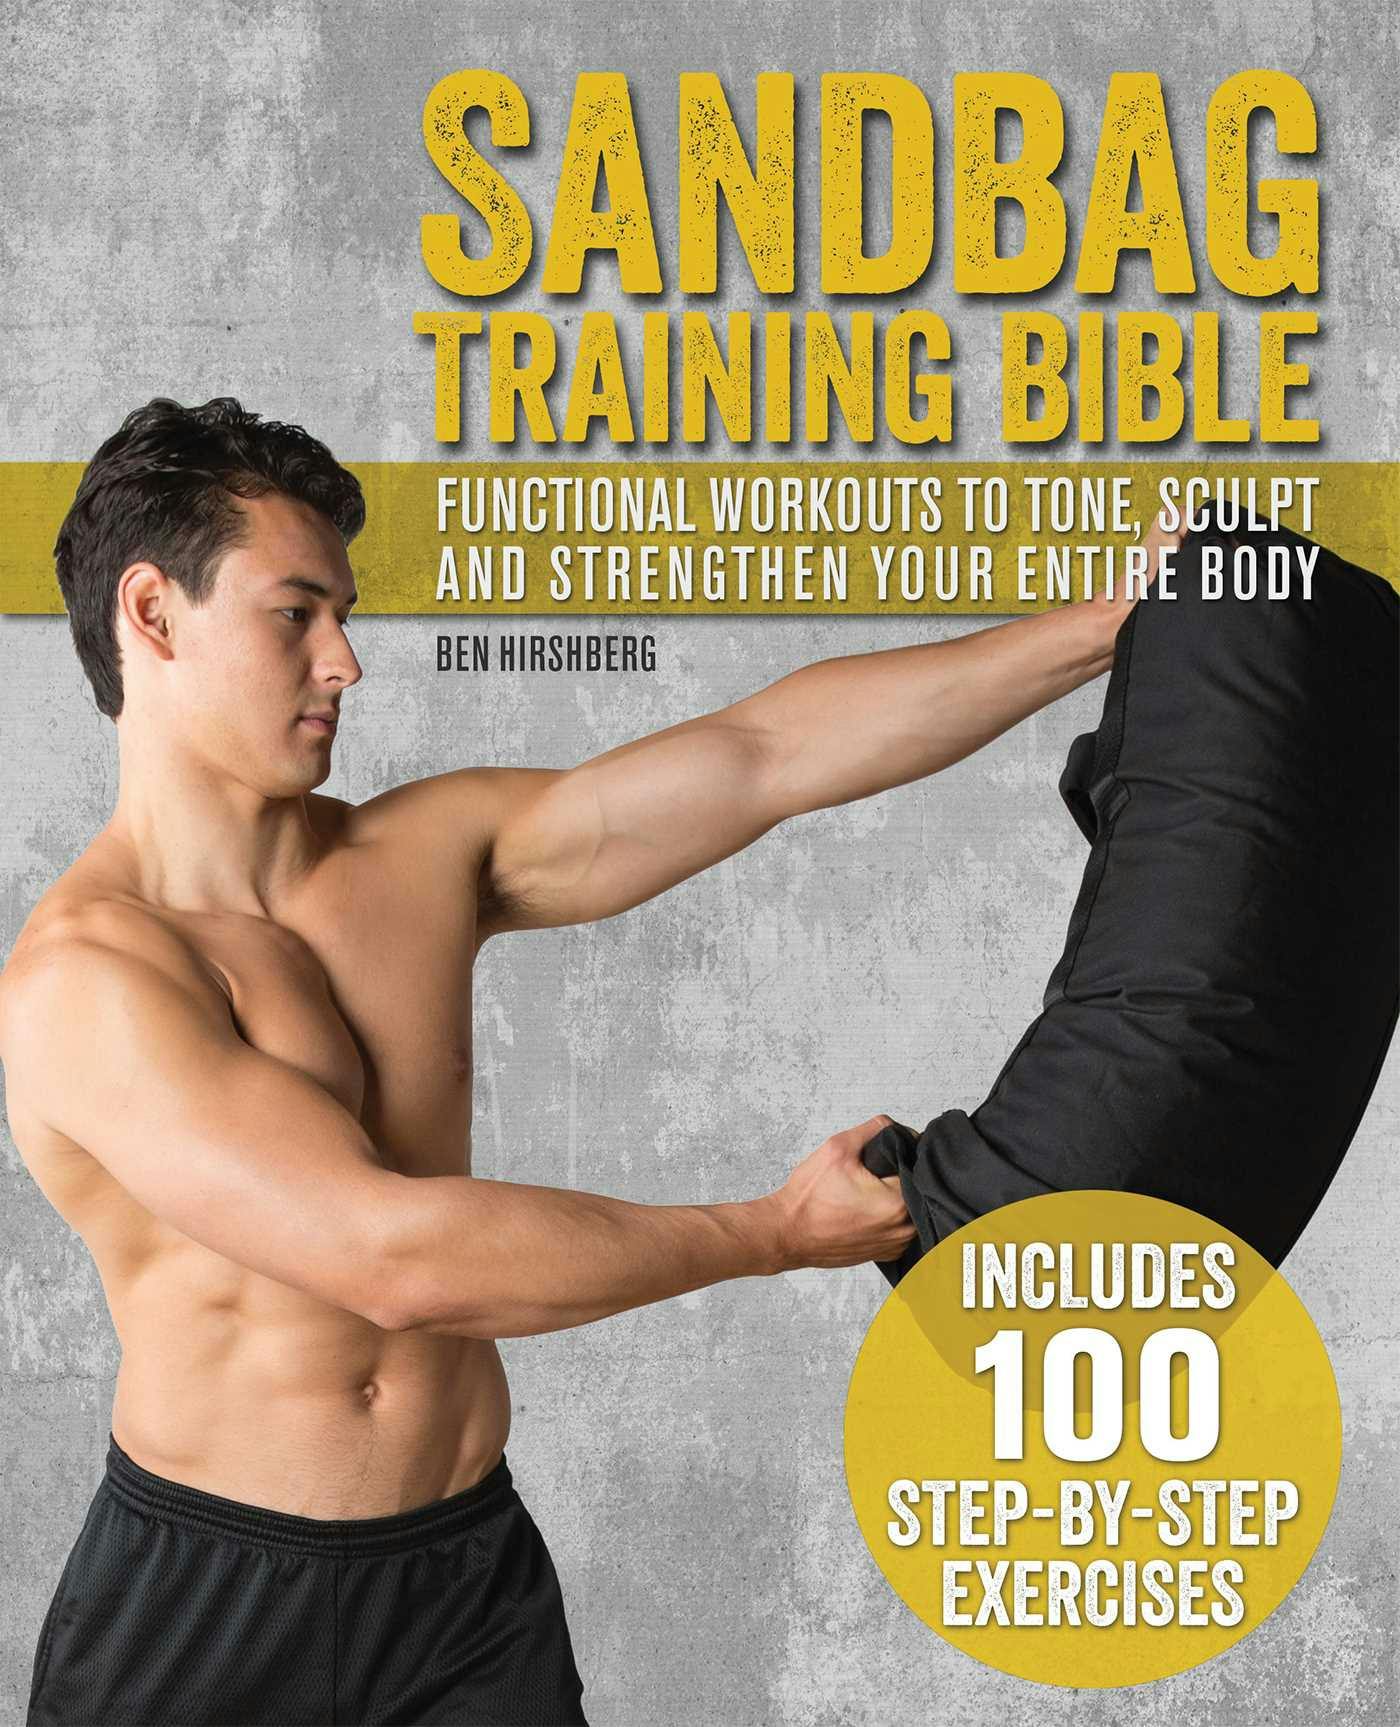 Sandbag Training Bible: Functional Workouts to Tone, Sculpt and Strengthen Your Entire Body - Ben Hirshberg